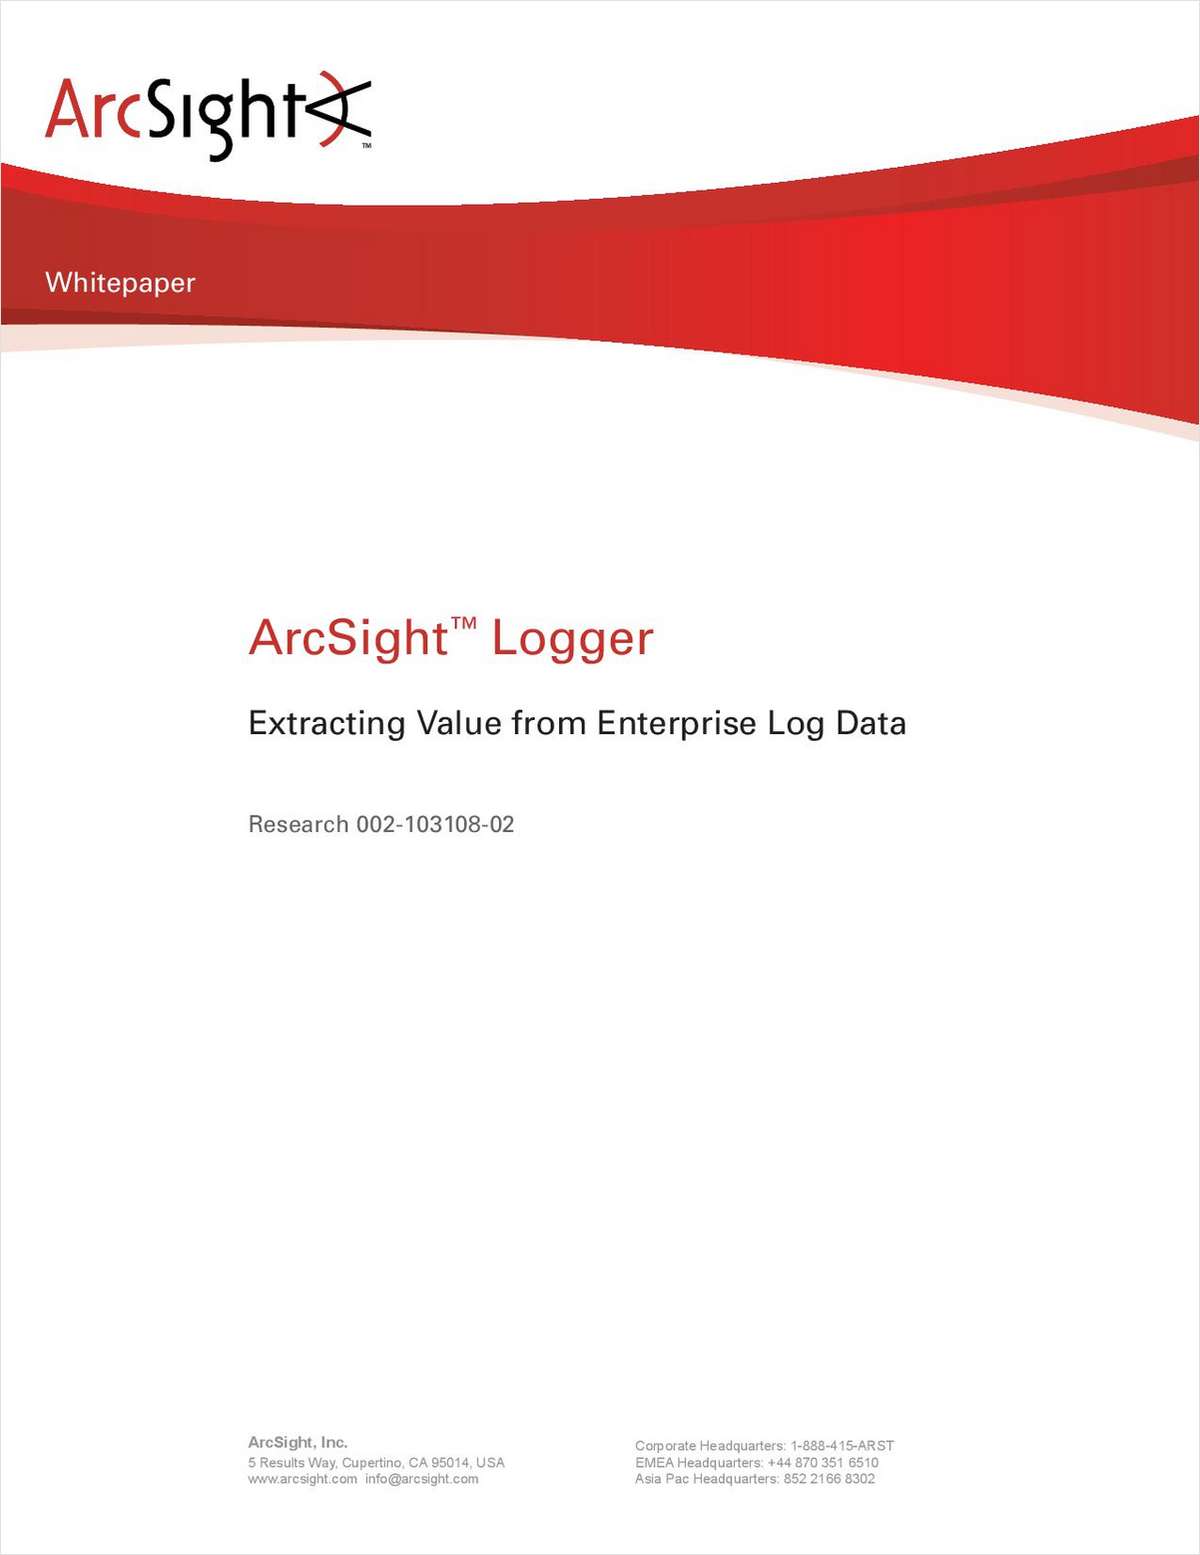 Extracting Value from Enterprise Log Data